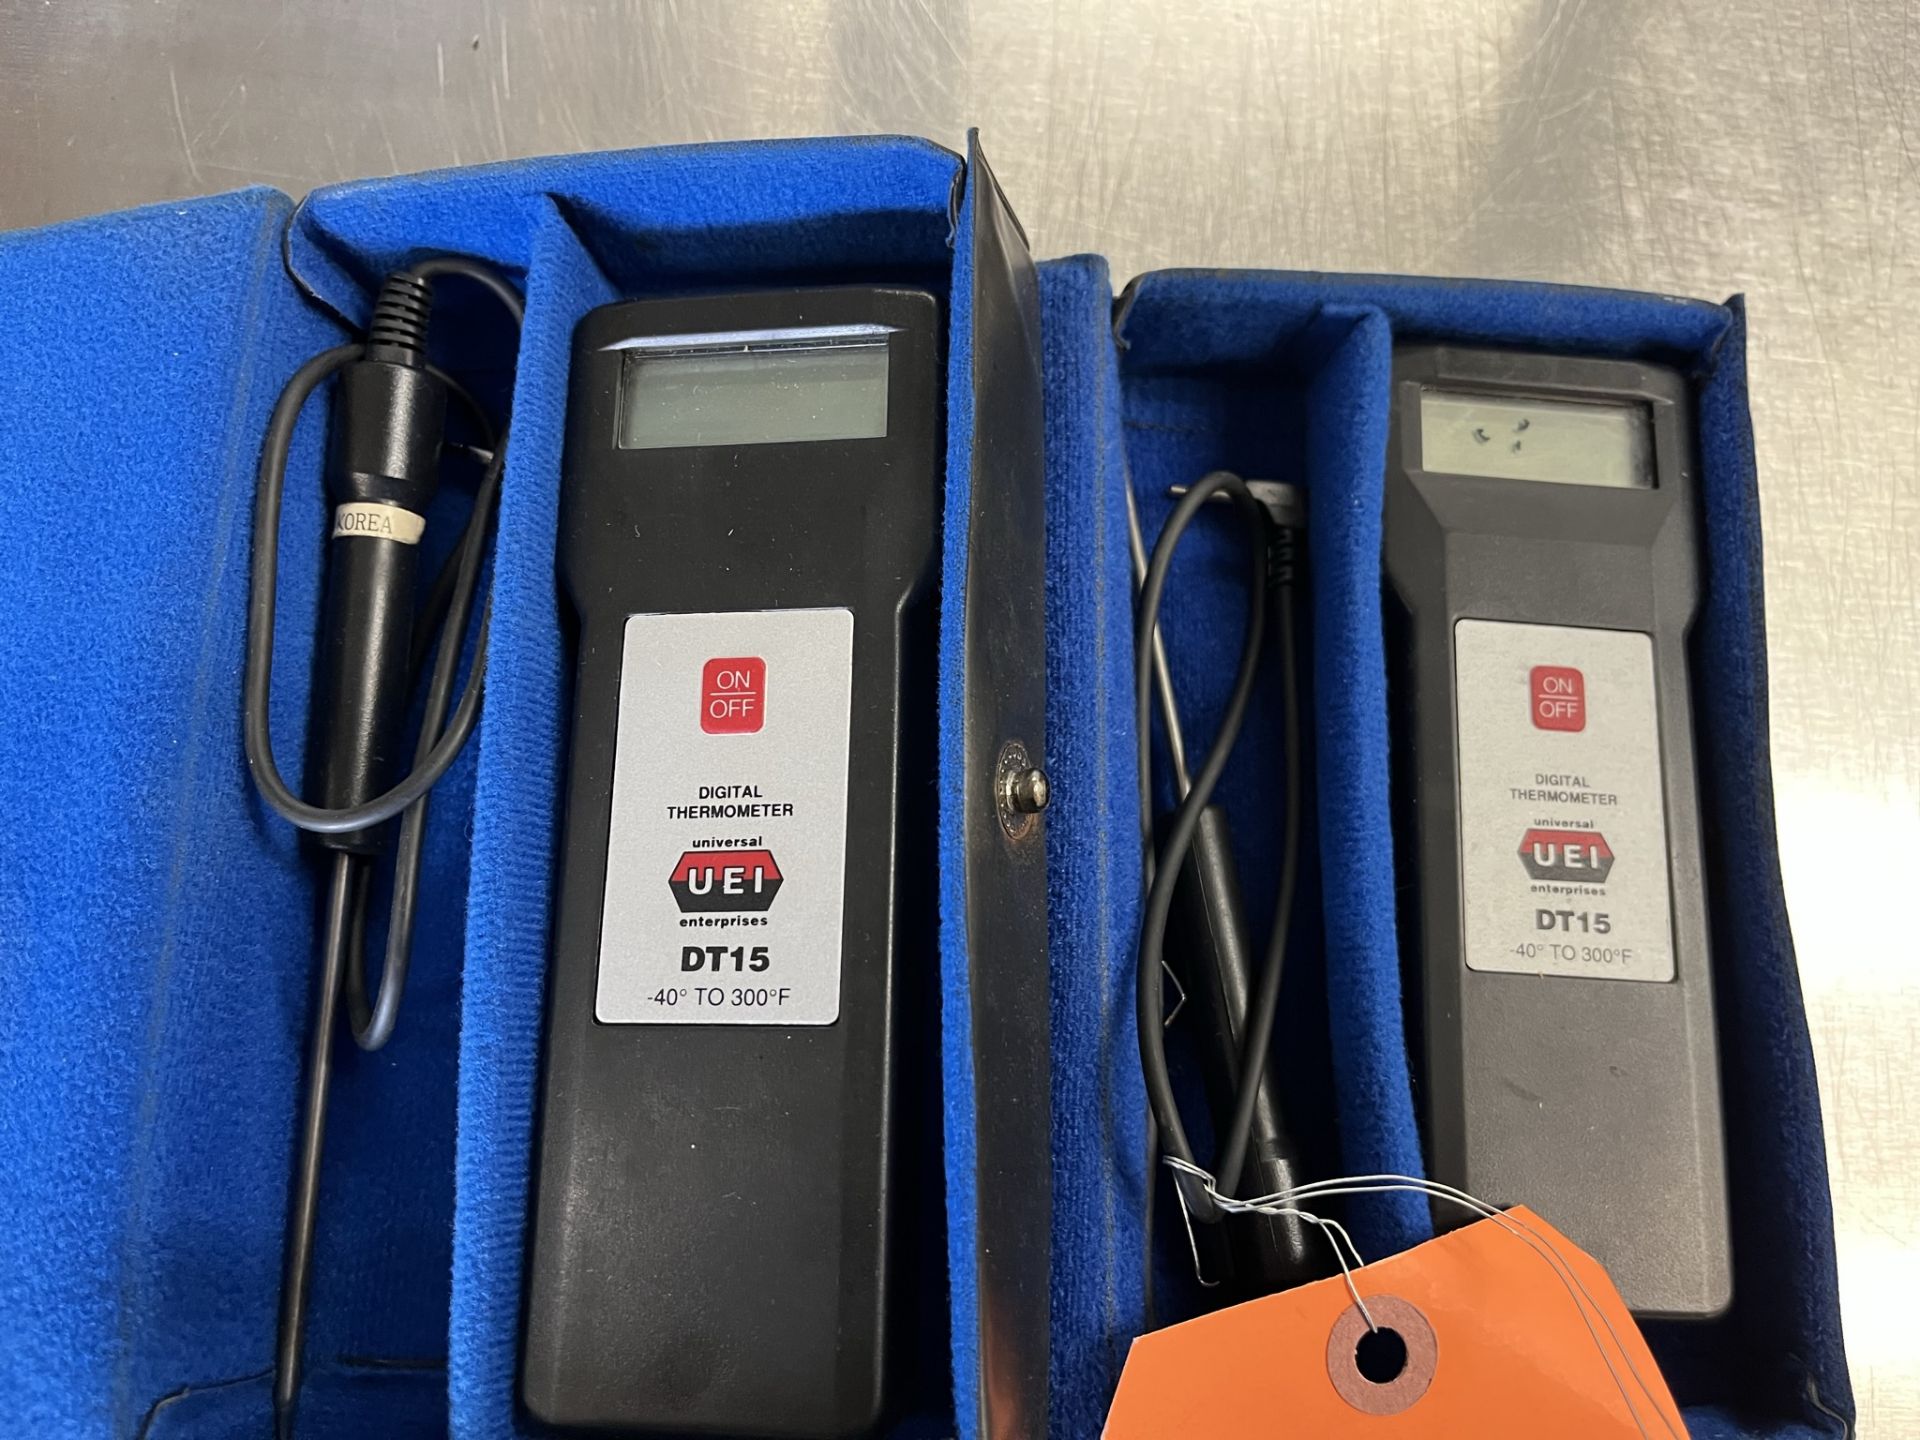 (2) UEI DT15 DIGITAL THERMOMETER